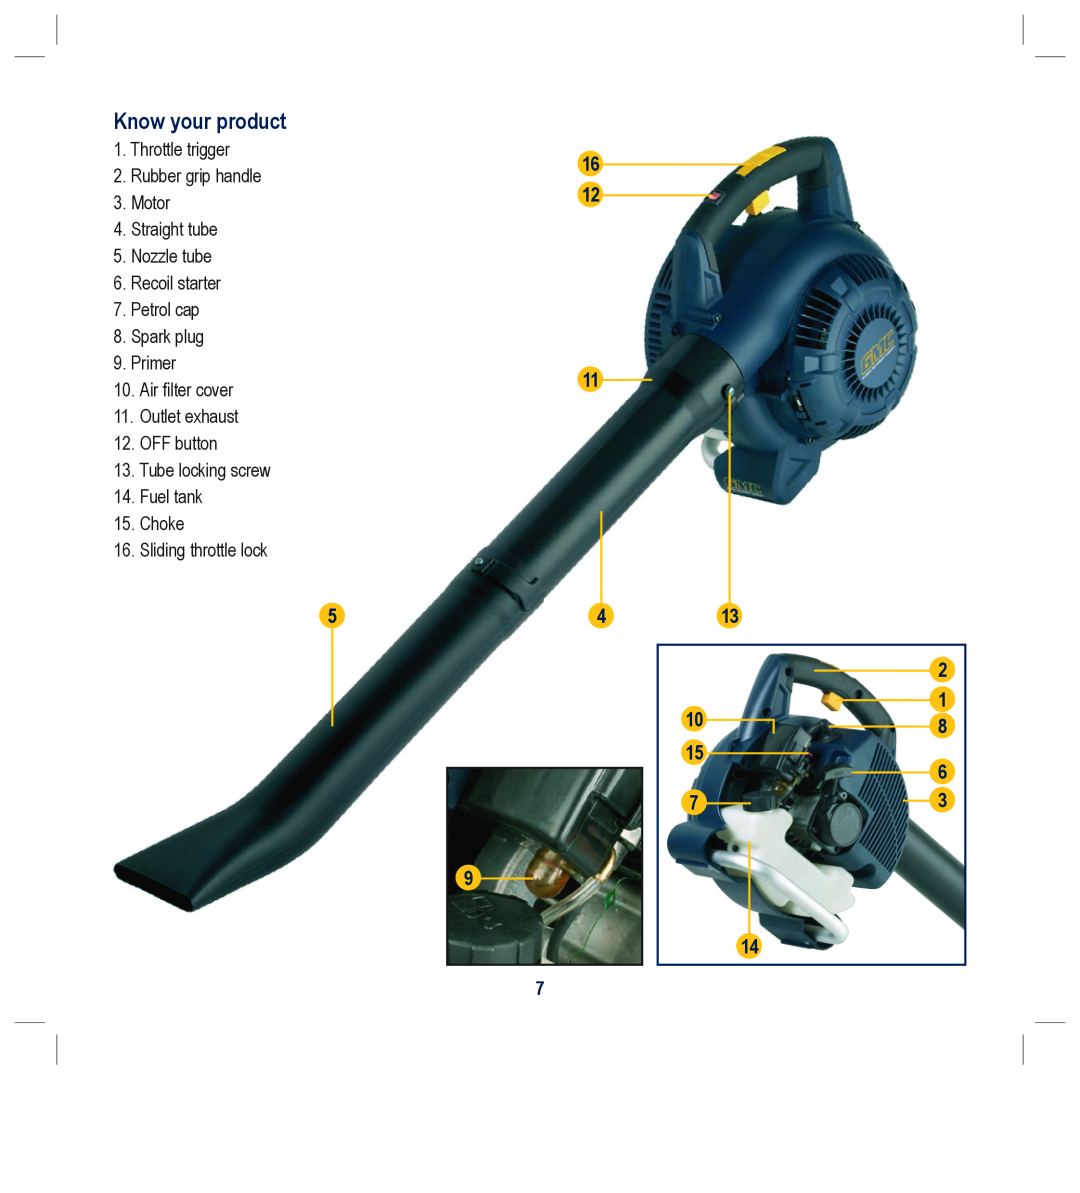 Global Machinery Company PB26CC instruction manual Know your product, Throttle trigger 2.Rubber grip handle 3.Motor 